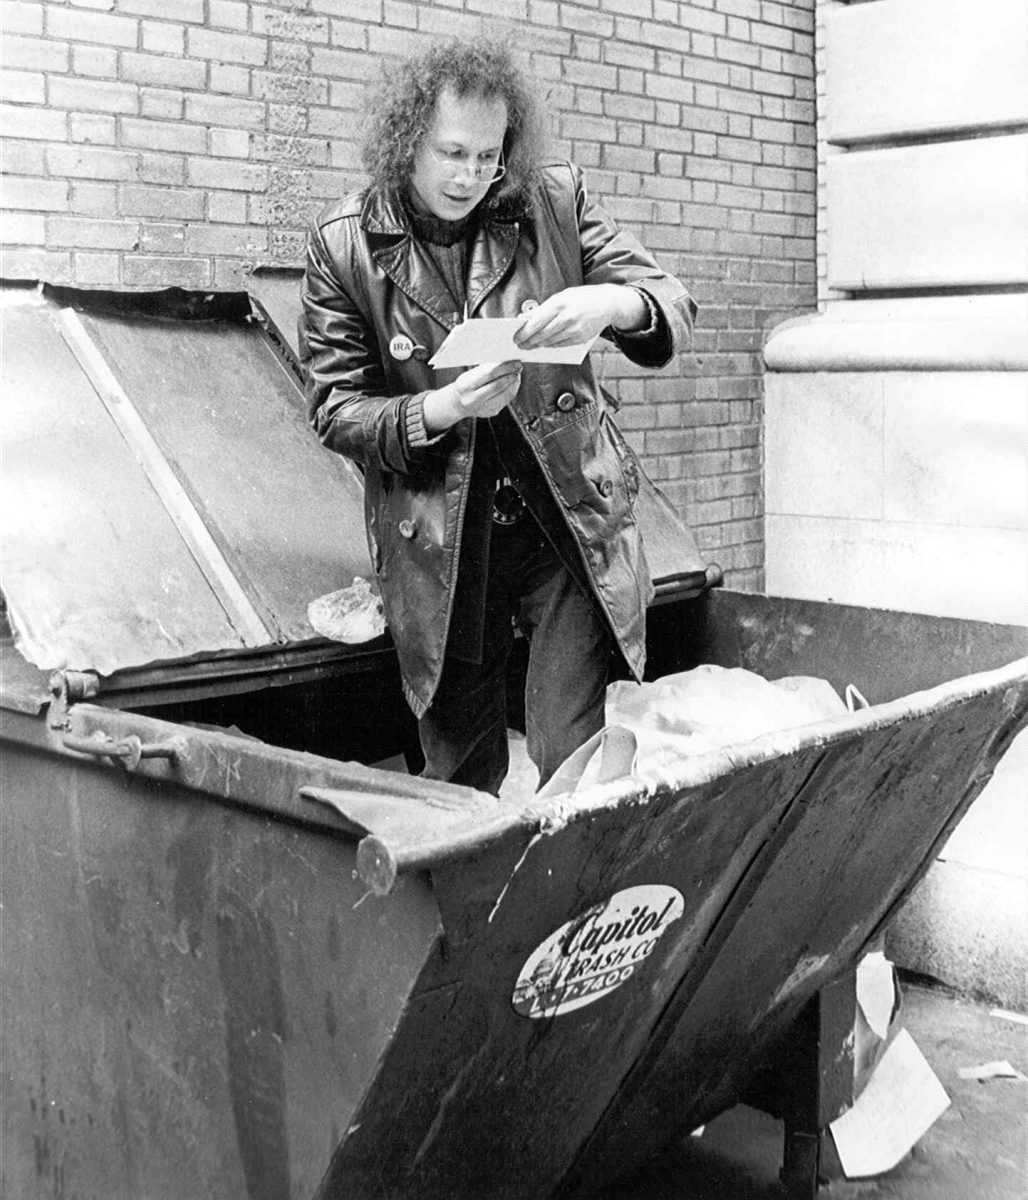 Guy looking through dumpster diving.